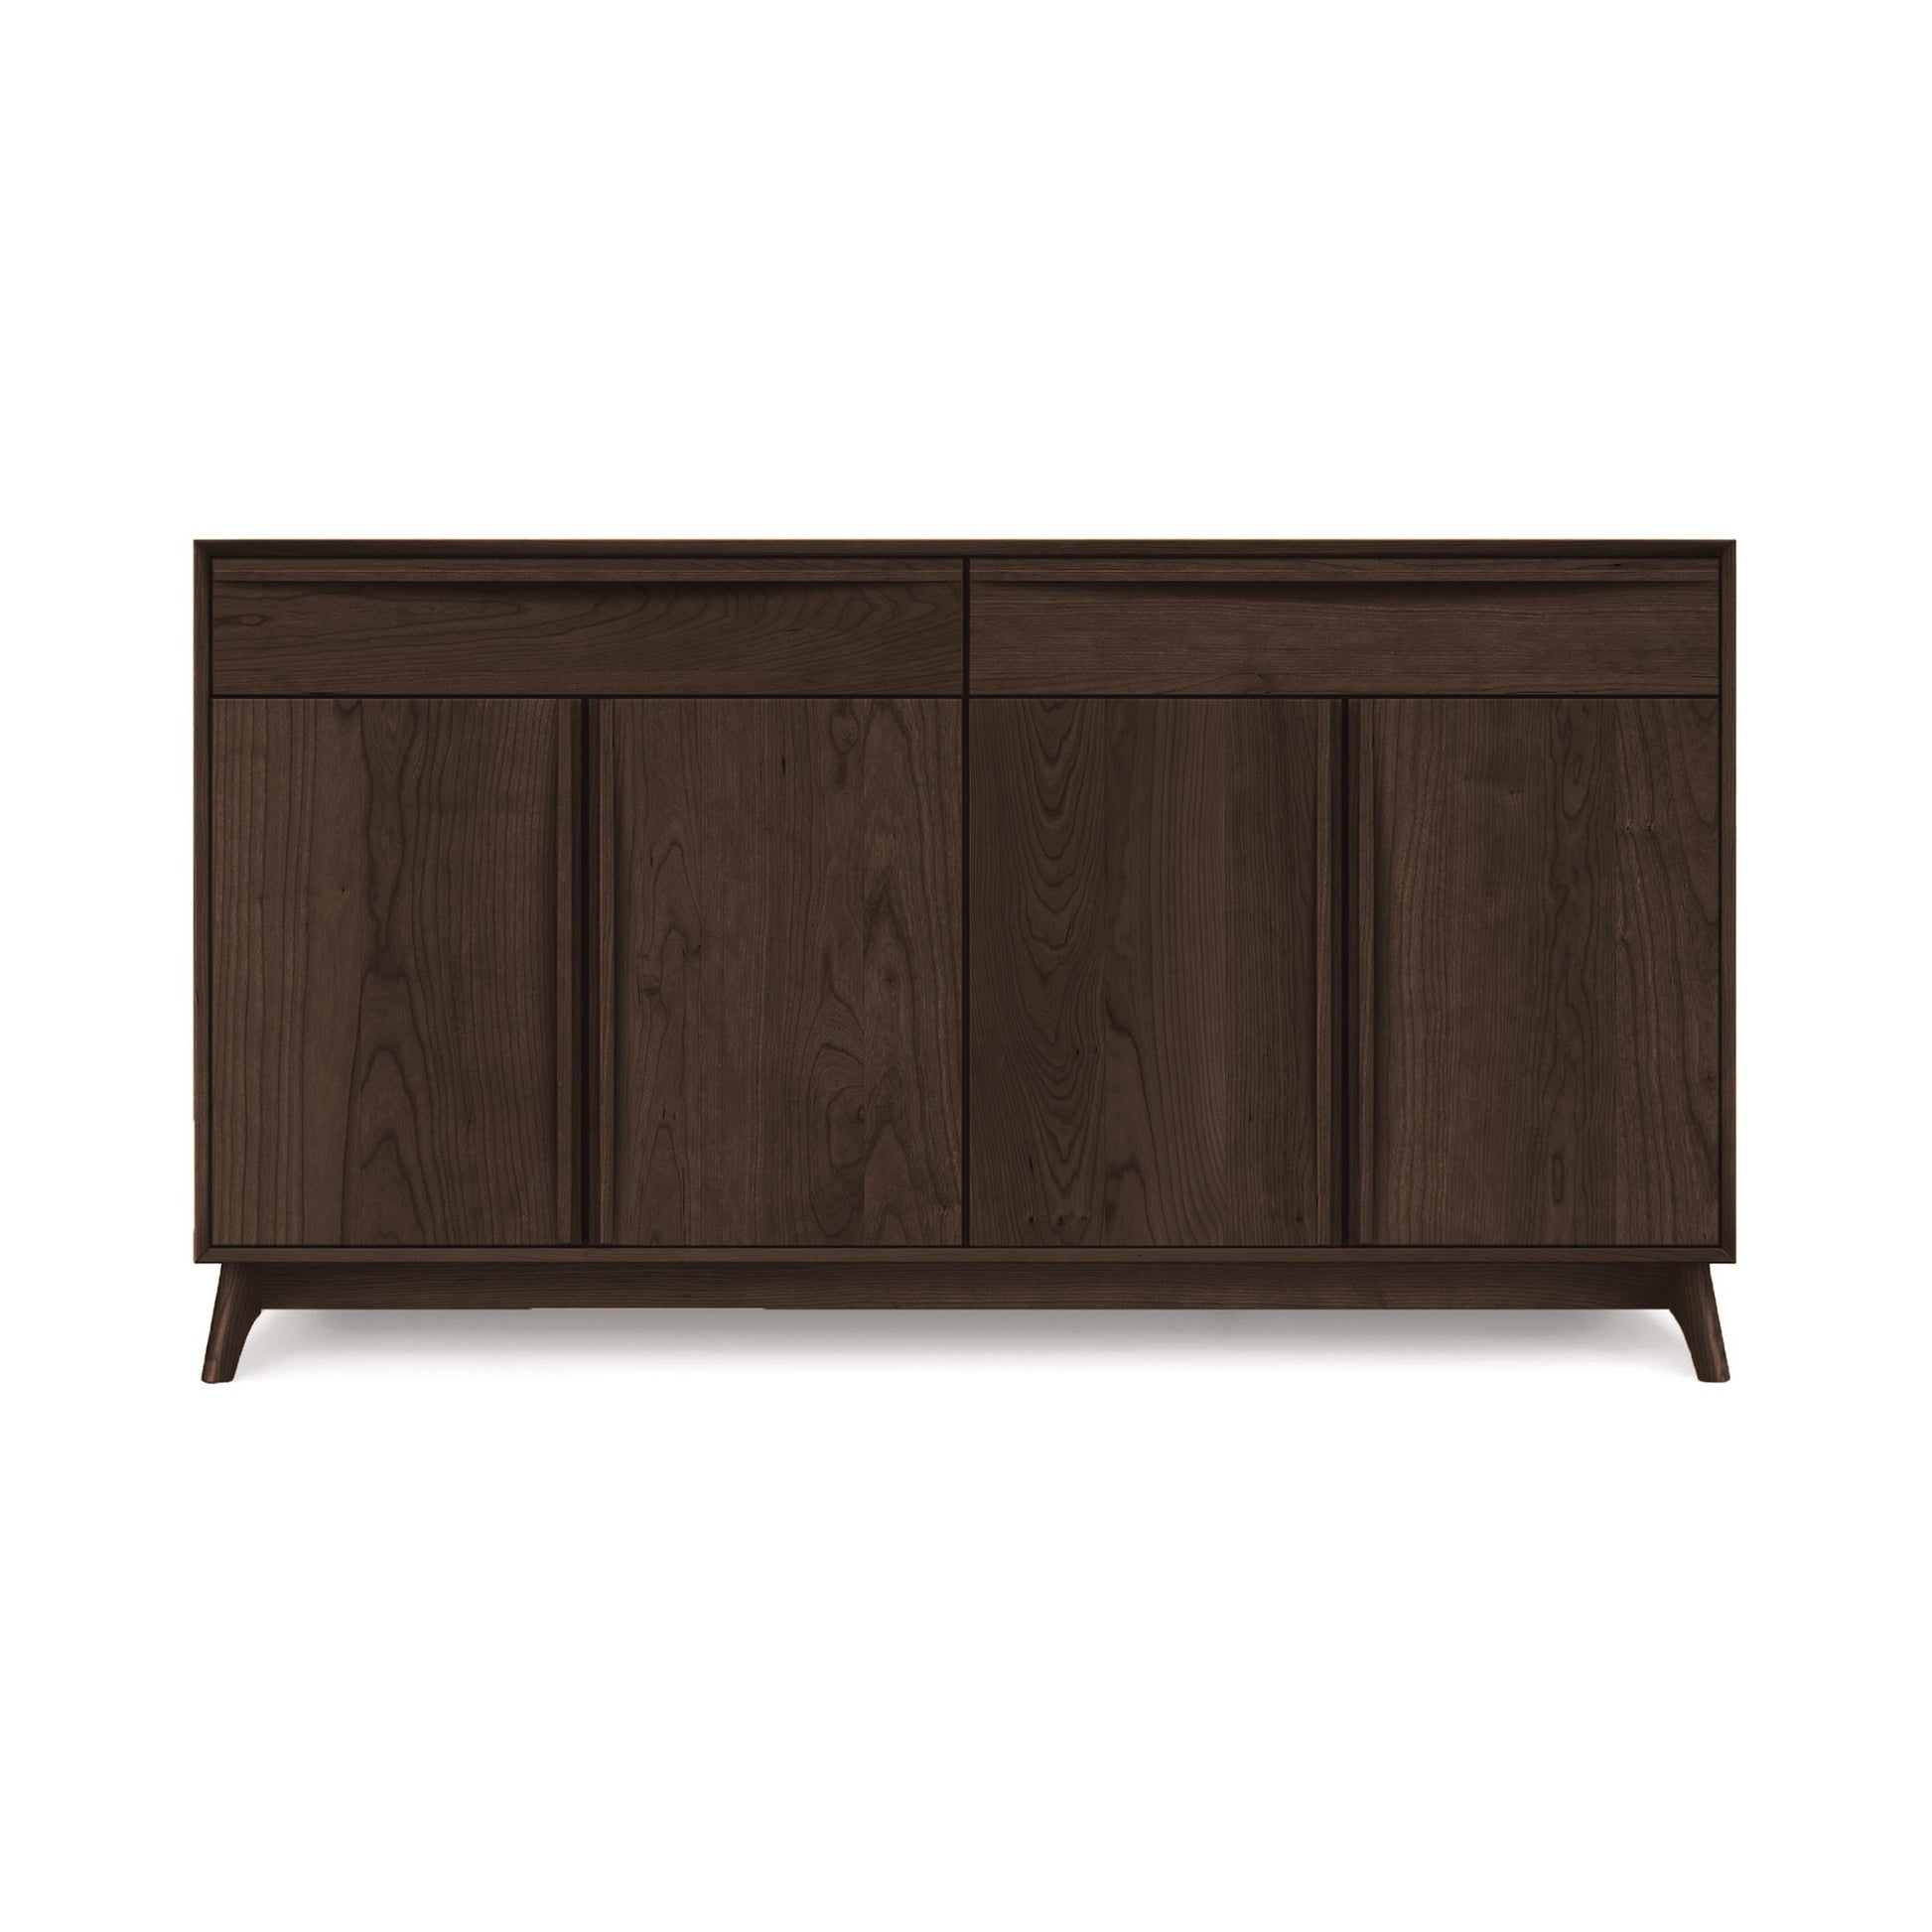 A handcrafted in Vermont Copeland Furniture Catalina 2-Drawers, 4-Door Buffet, a solid wood dining furniture piece with two compartments and a dark finish, standing on angled legs.